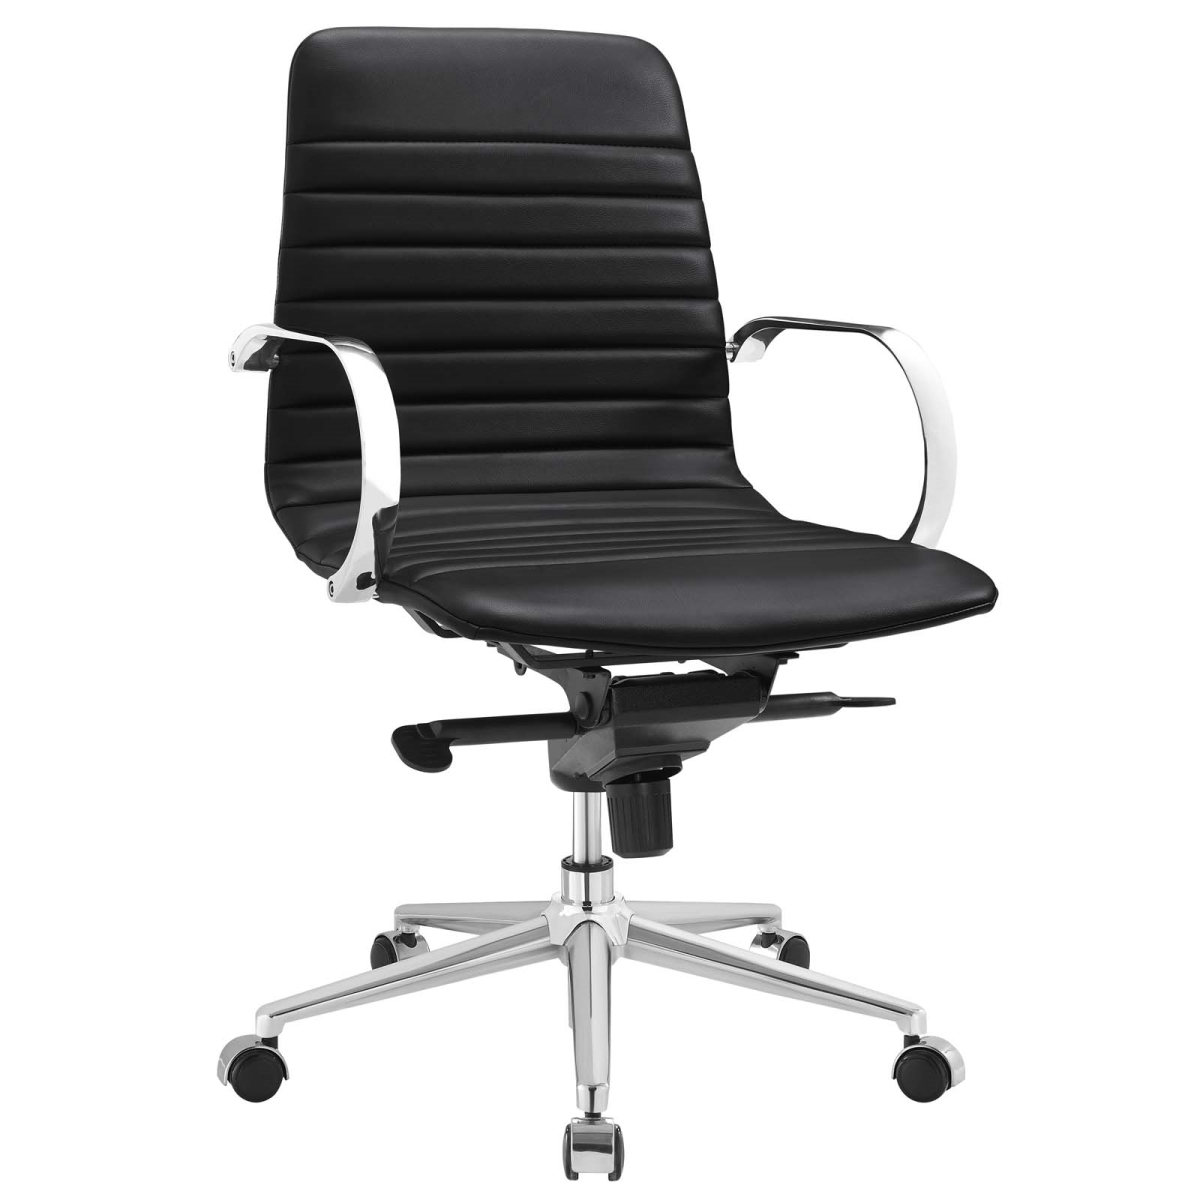 Eei-2859-blk Groove Ribbed Back Office Chair - Black, 37 - 39 X 23 X 24 In.